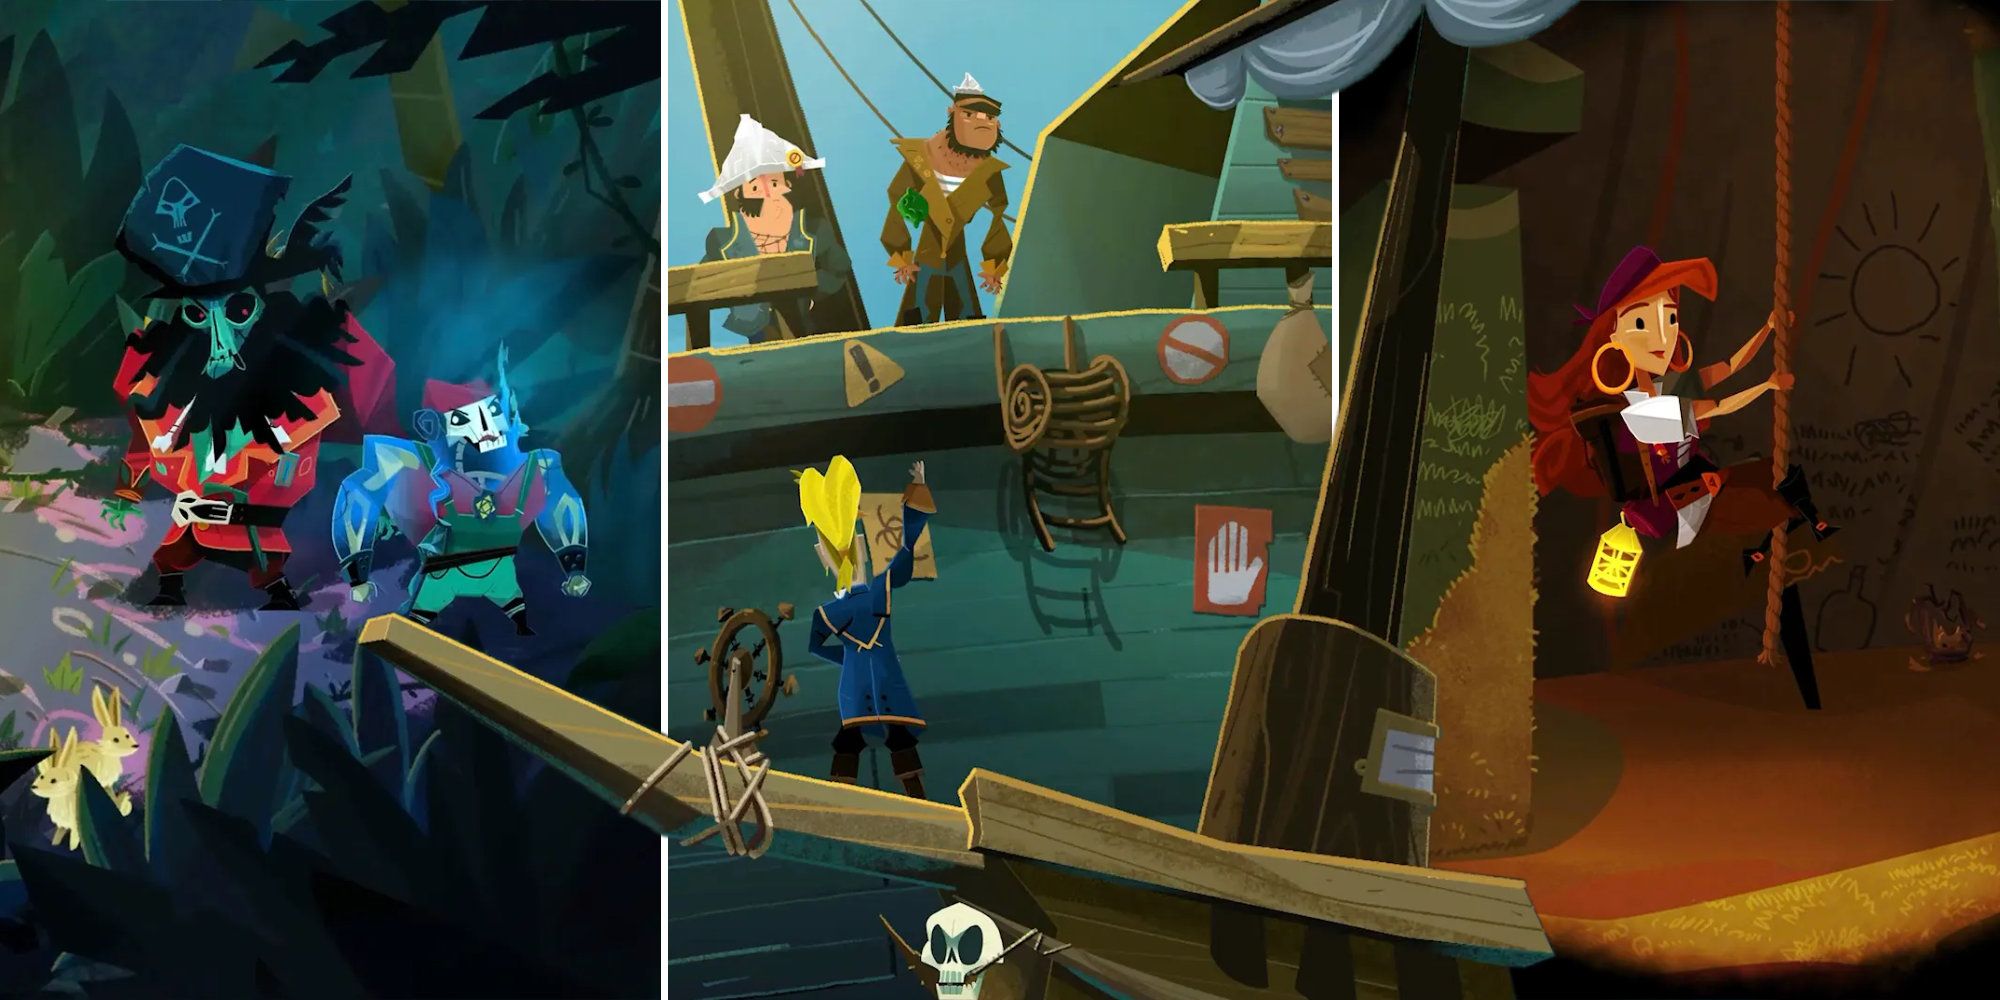 split image of zombie pirates, regular pirates, and a female pirate